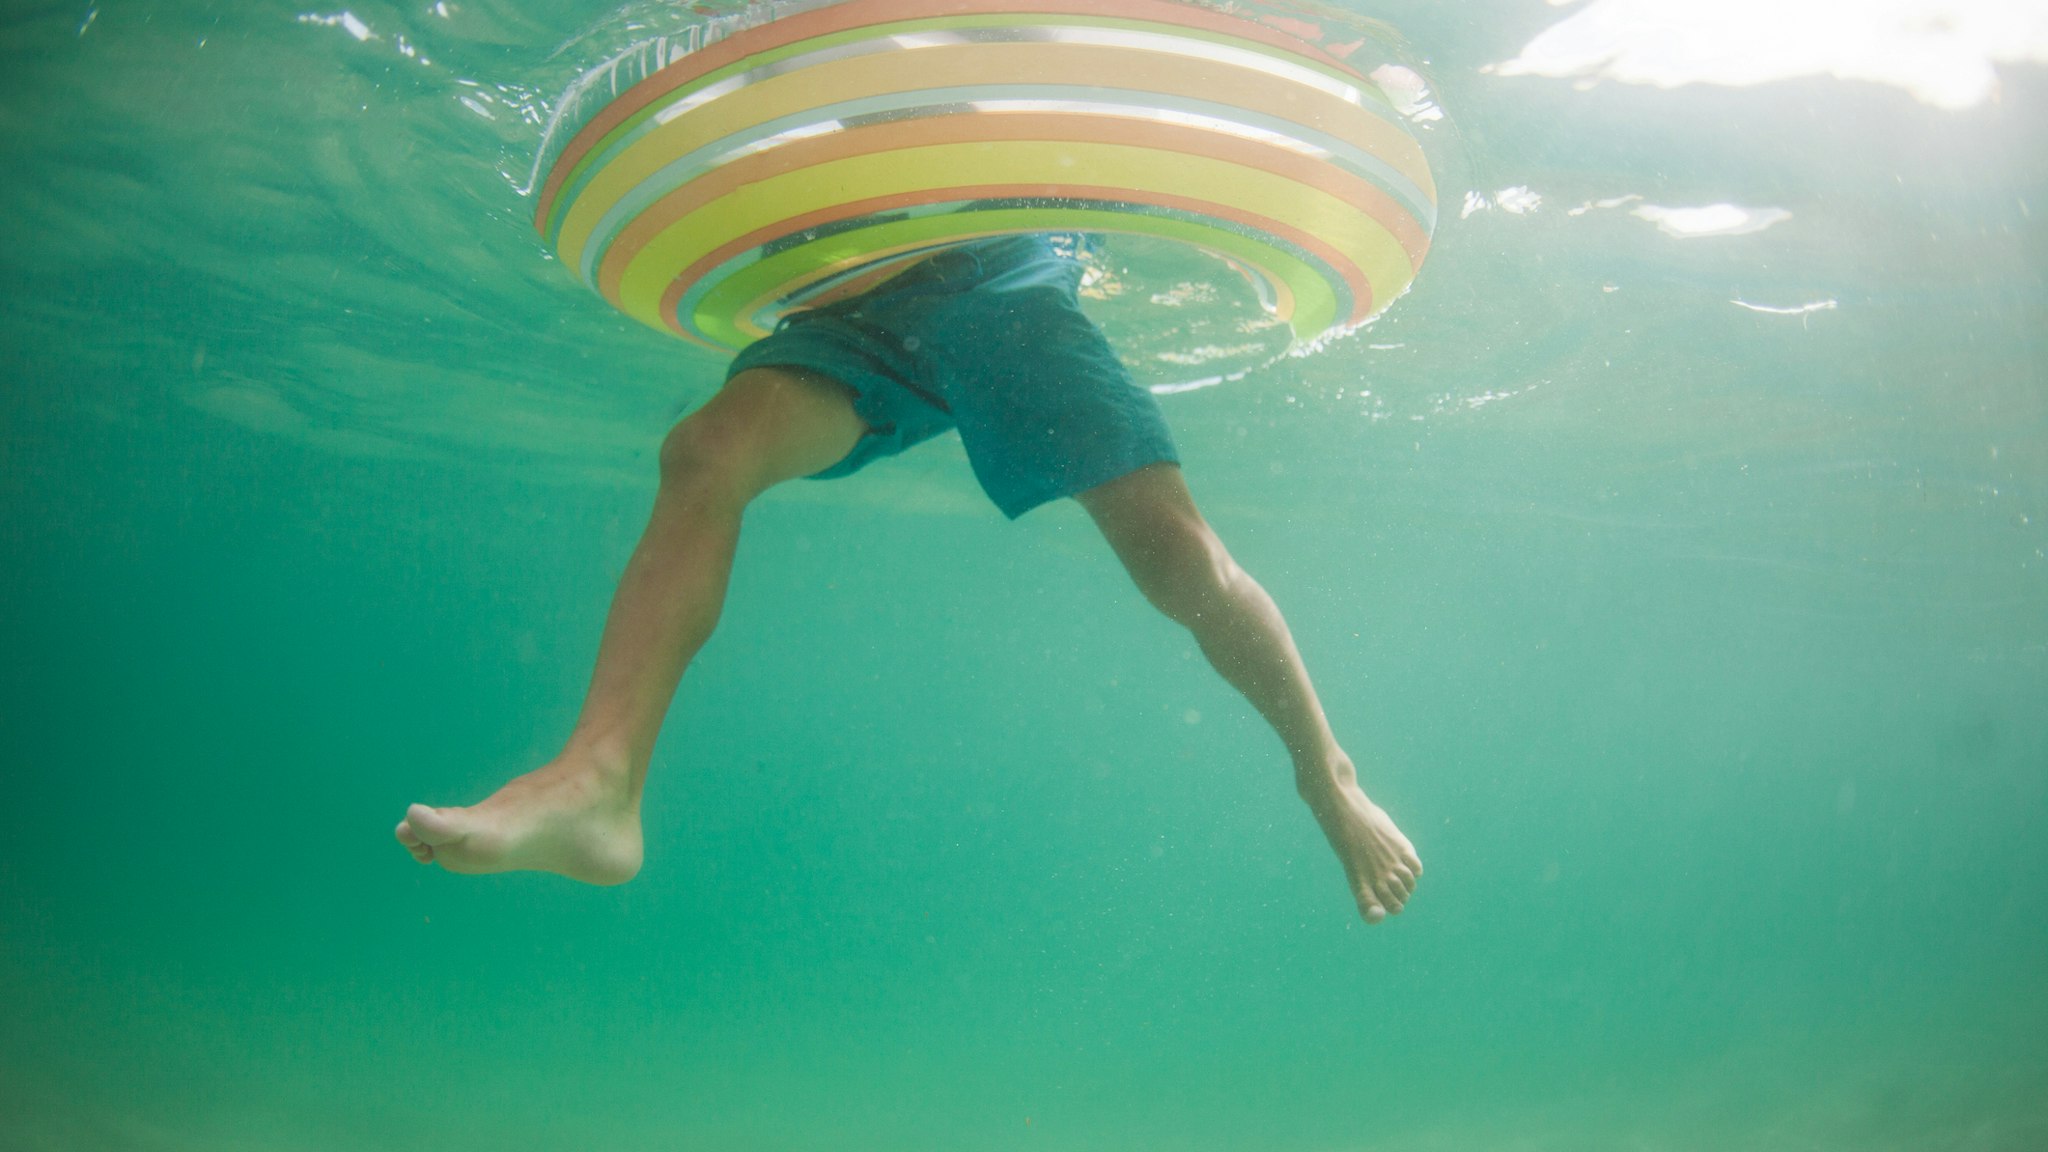 Underwater view of a boy in an inflatable rubber ring, California, United States - stock photo